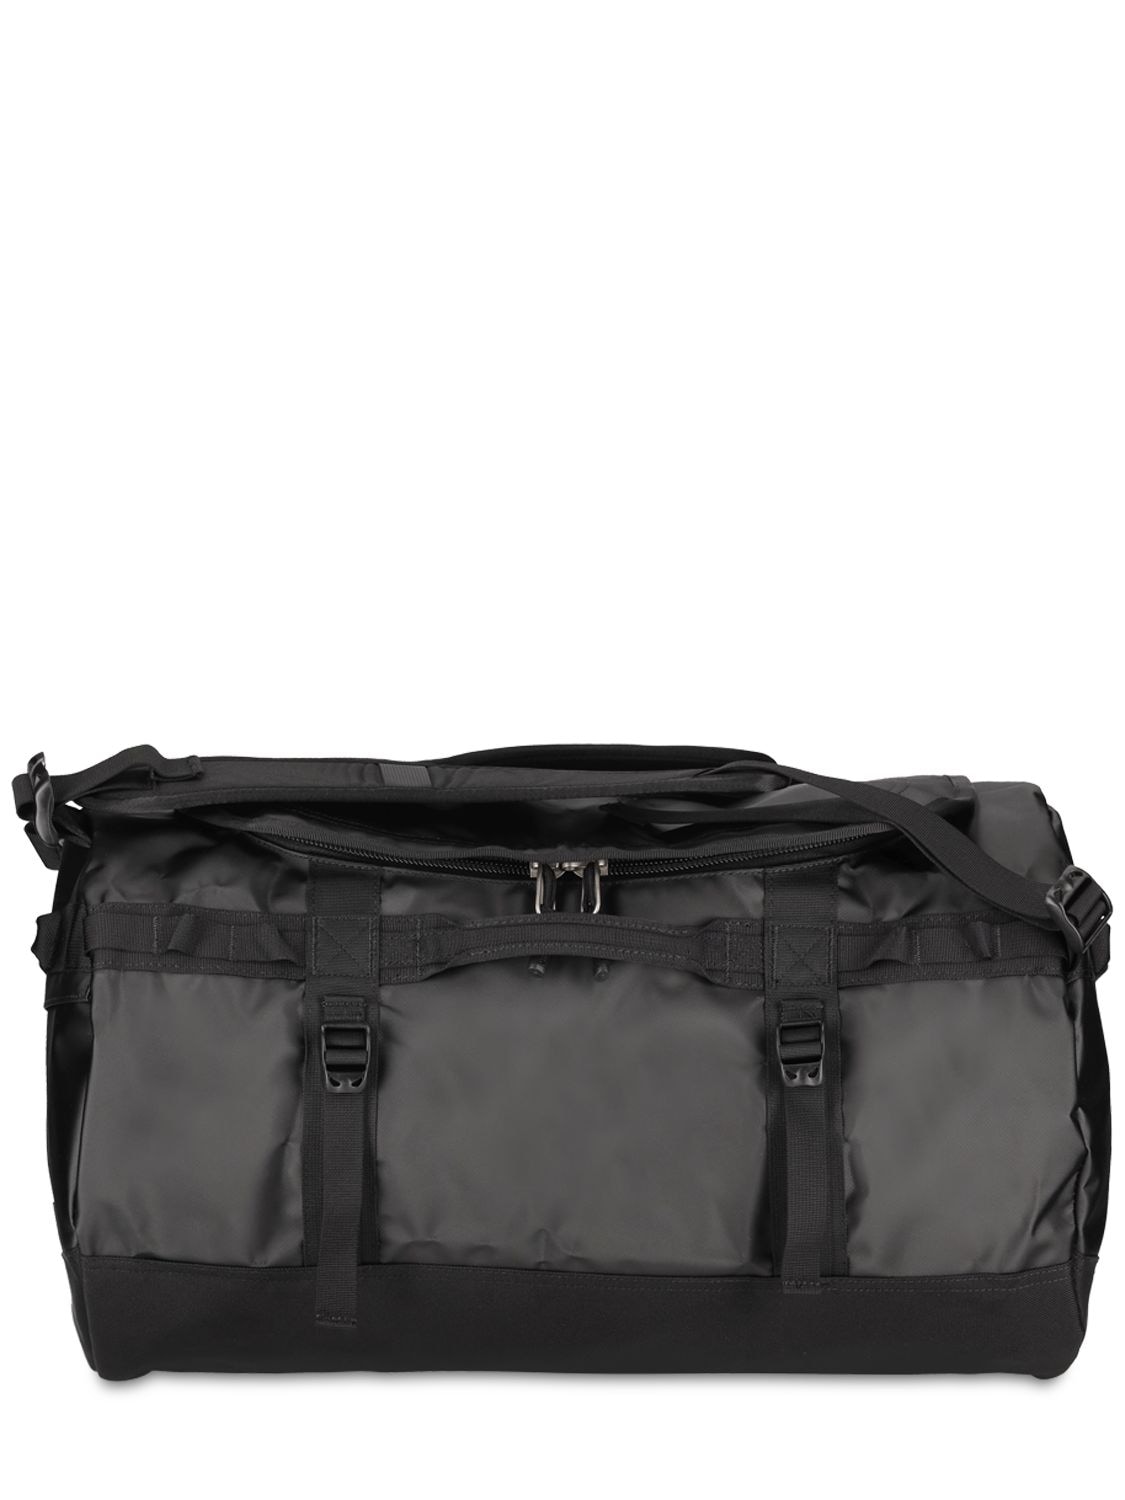 THE NORTH FACE 50l Base Camp Duffle Bag